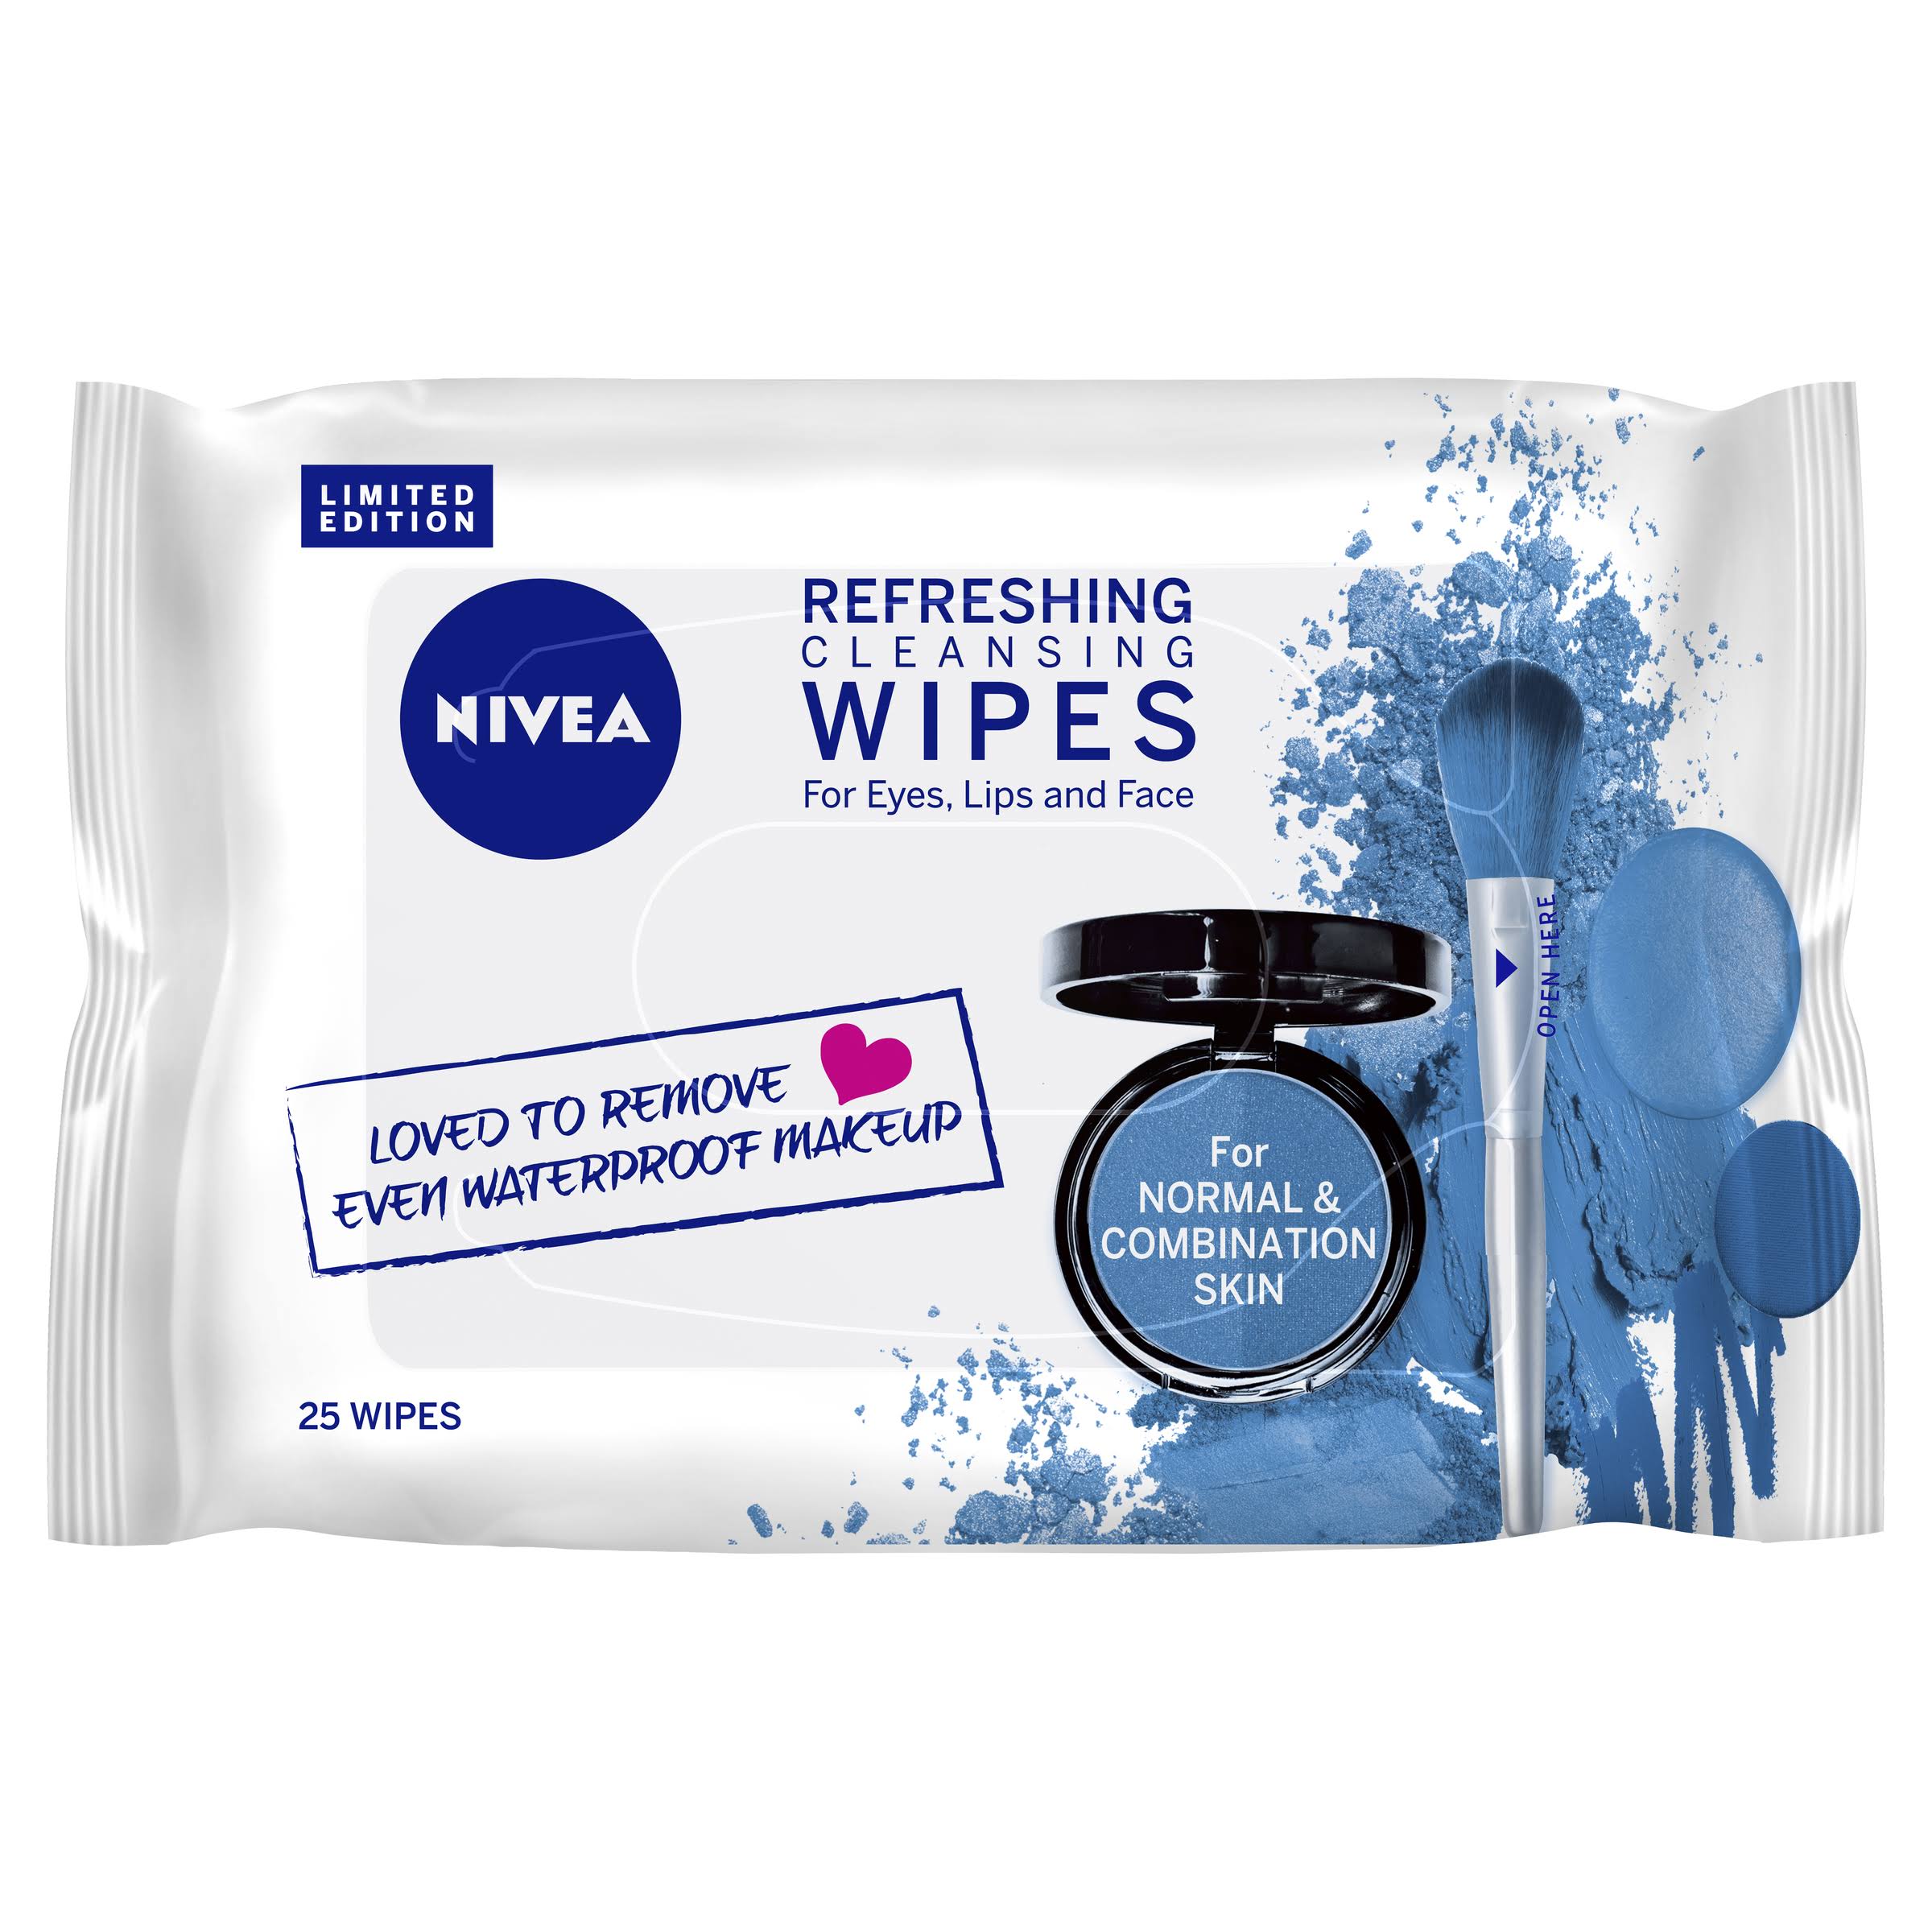 Nivea Daily Essentials 3 in 1 Refreshing Cleansing Wipes - Normal Skin, 25 Wipes